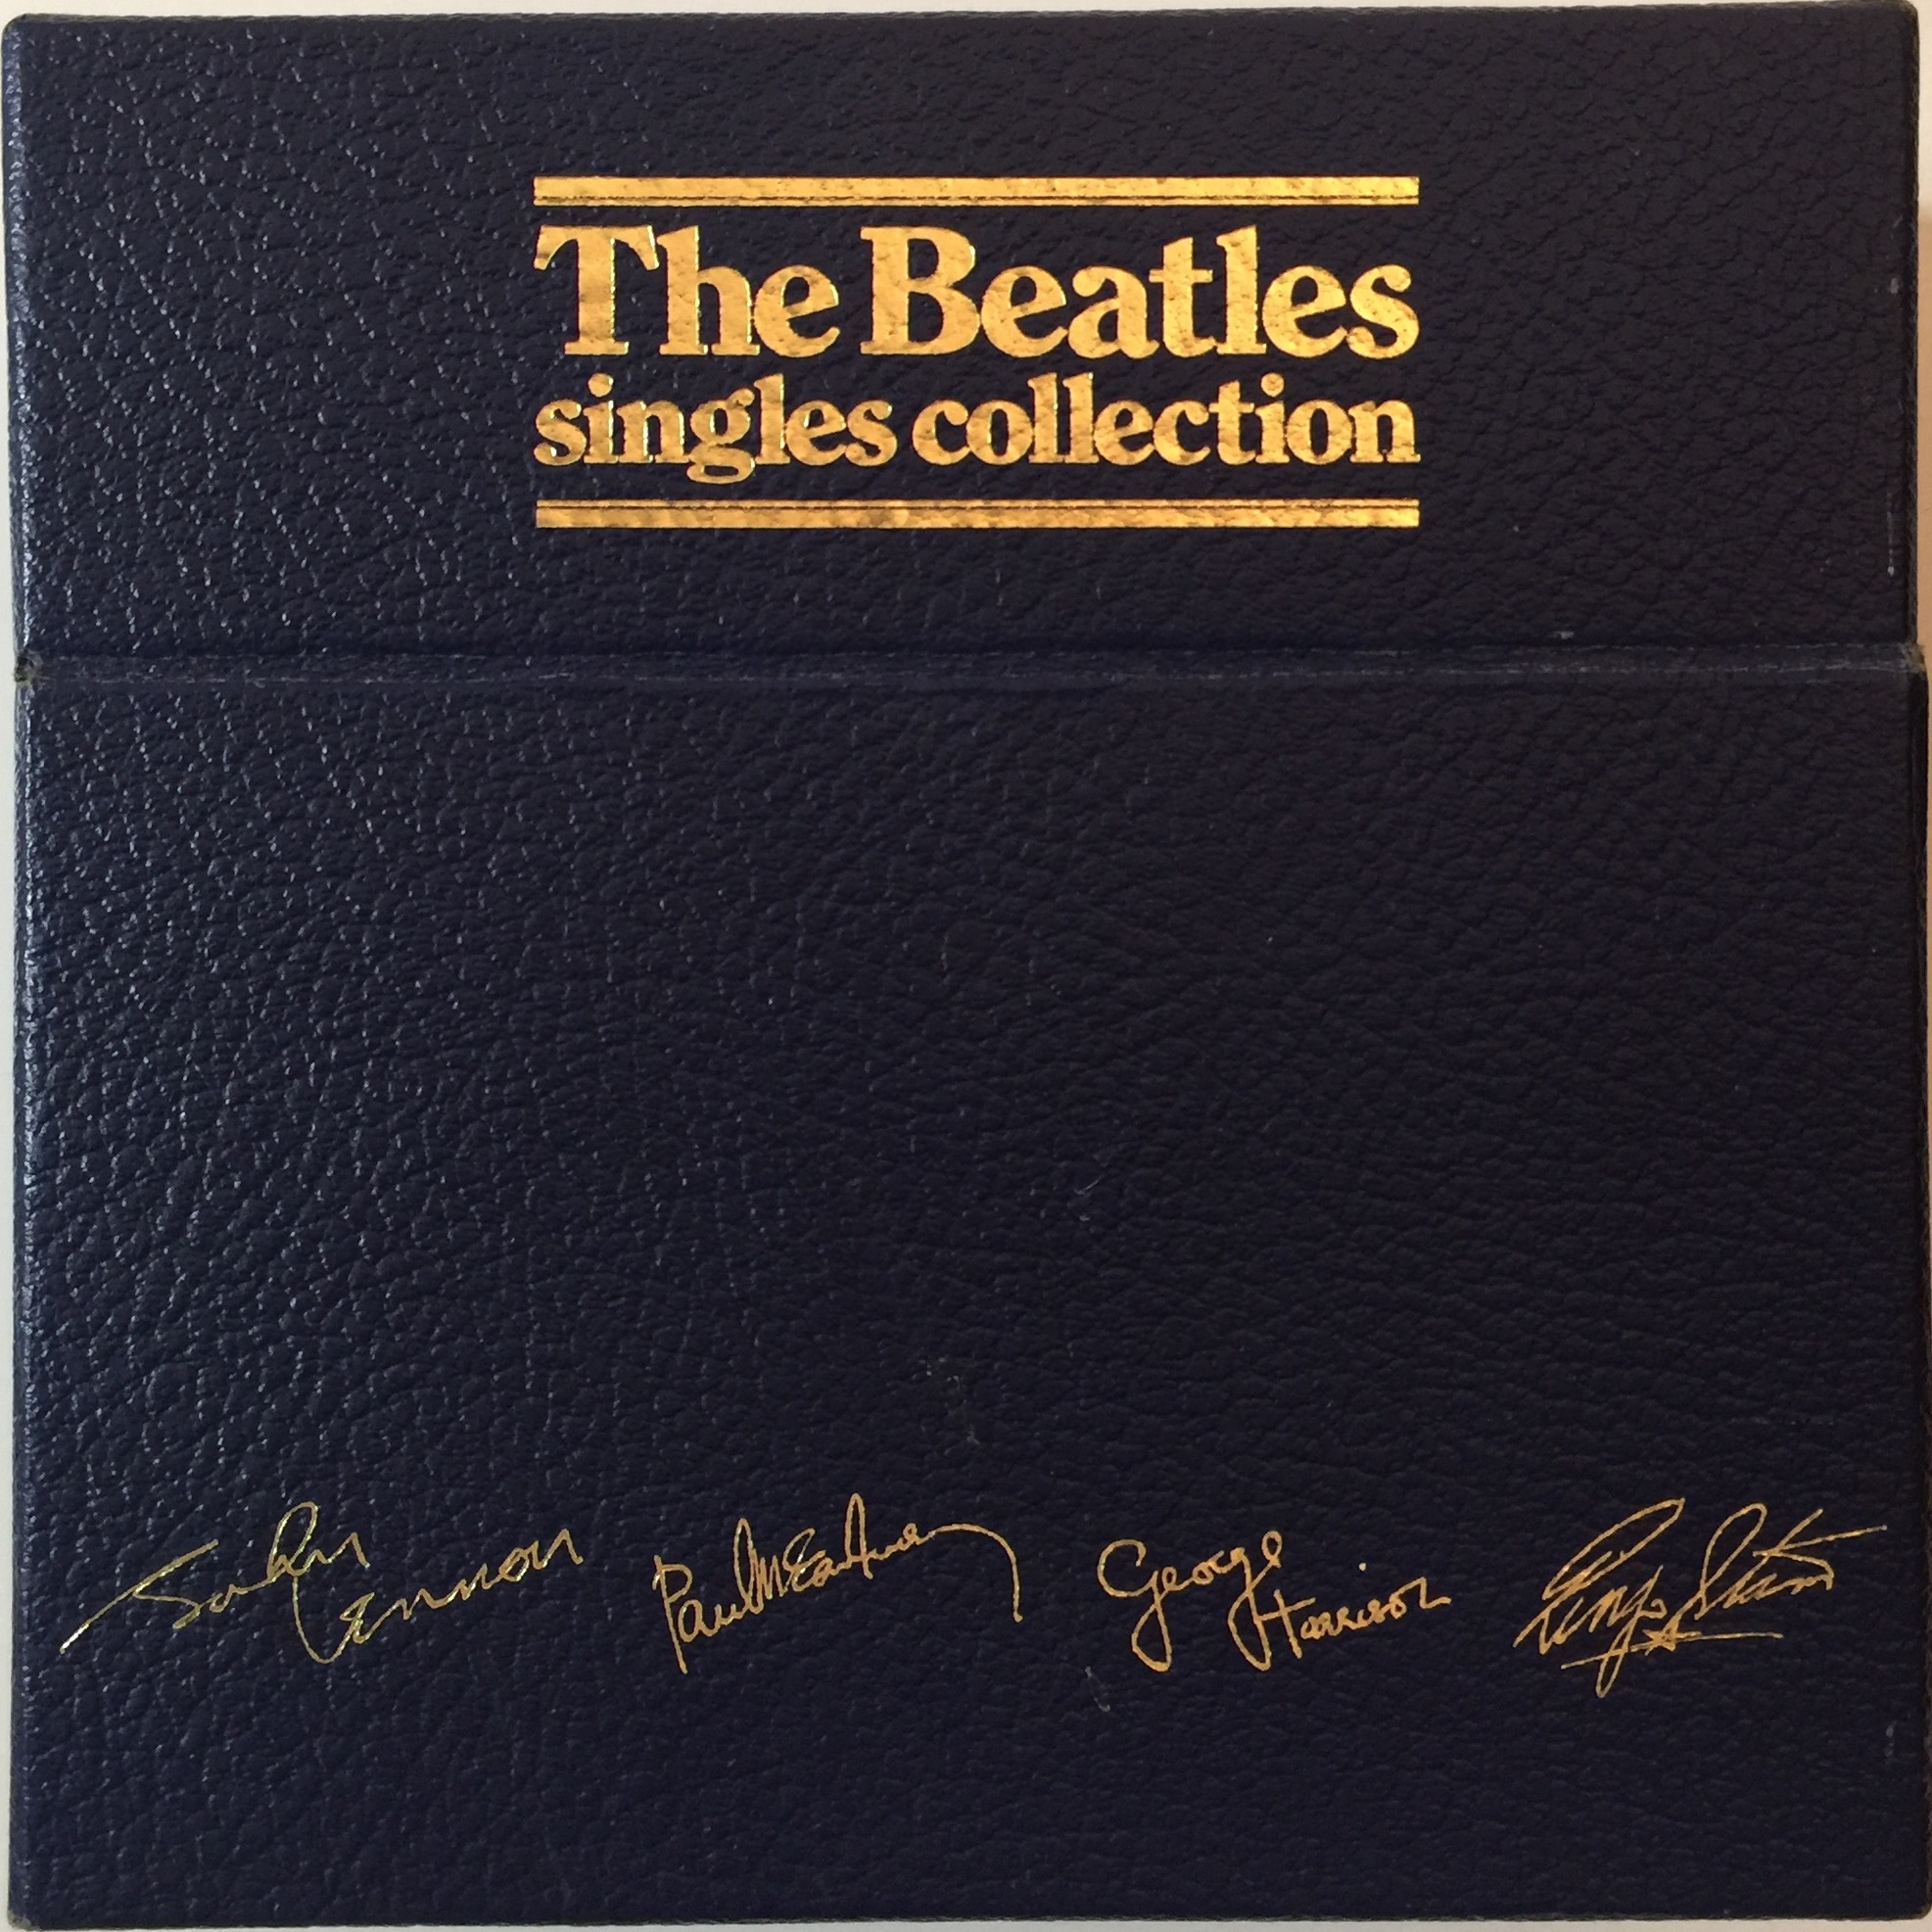 THE BEATLES - SINGLES COLLECTION (1982 'BLUE' BOX SET 